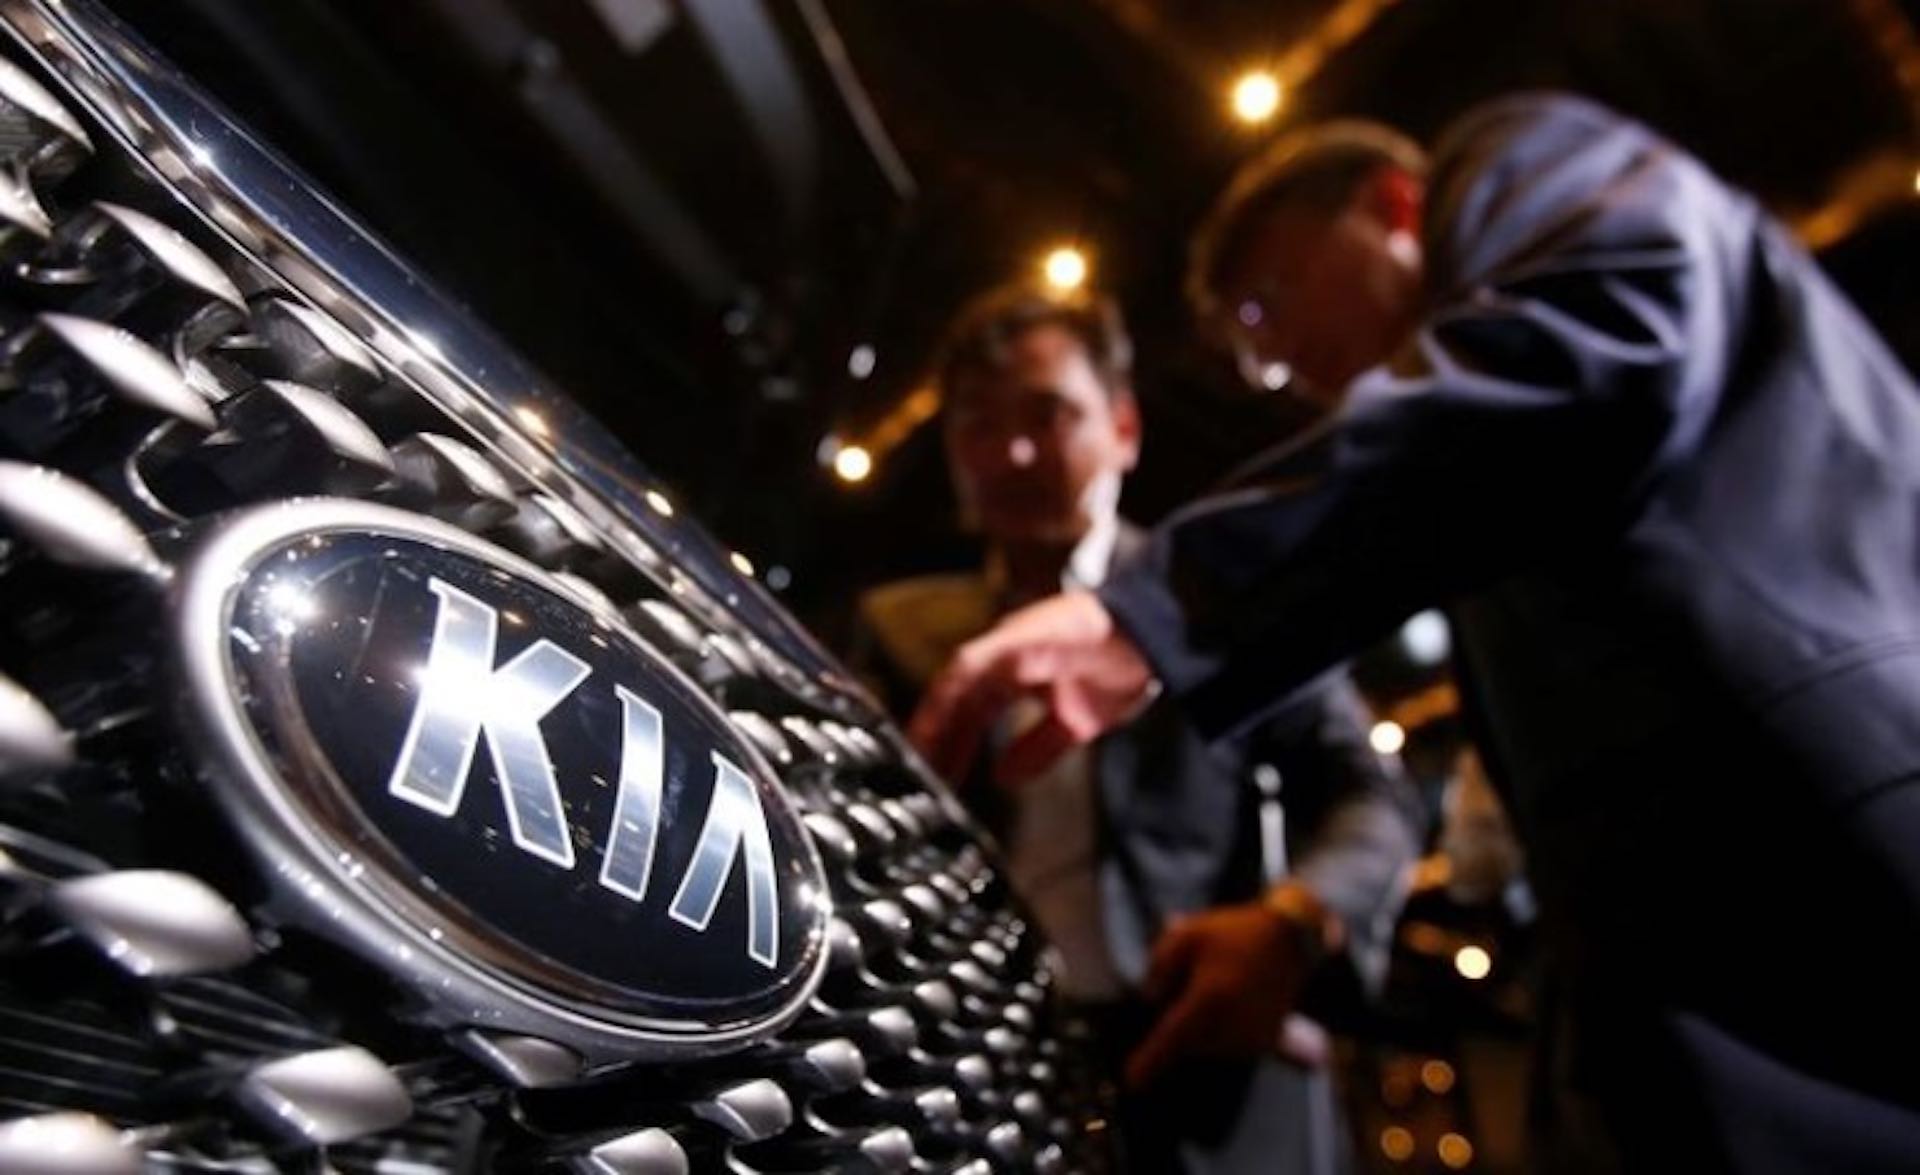 Net profit of Kia in Q3 plunged due to recall costs